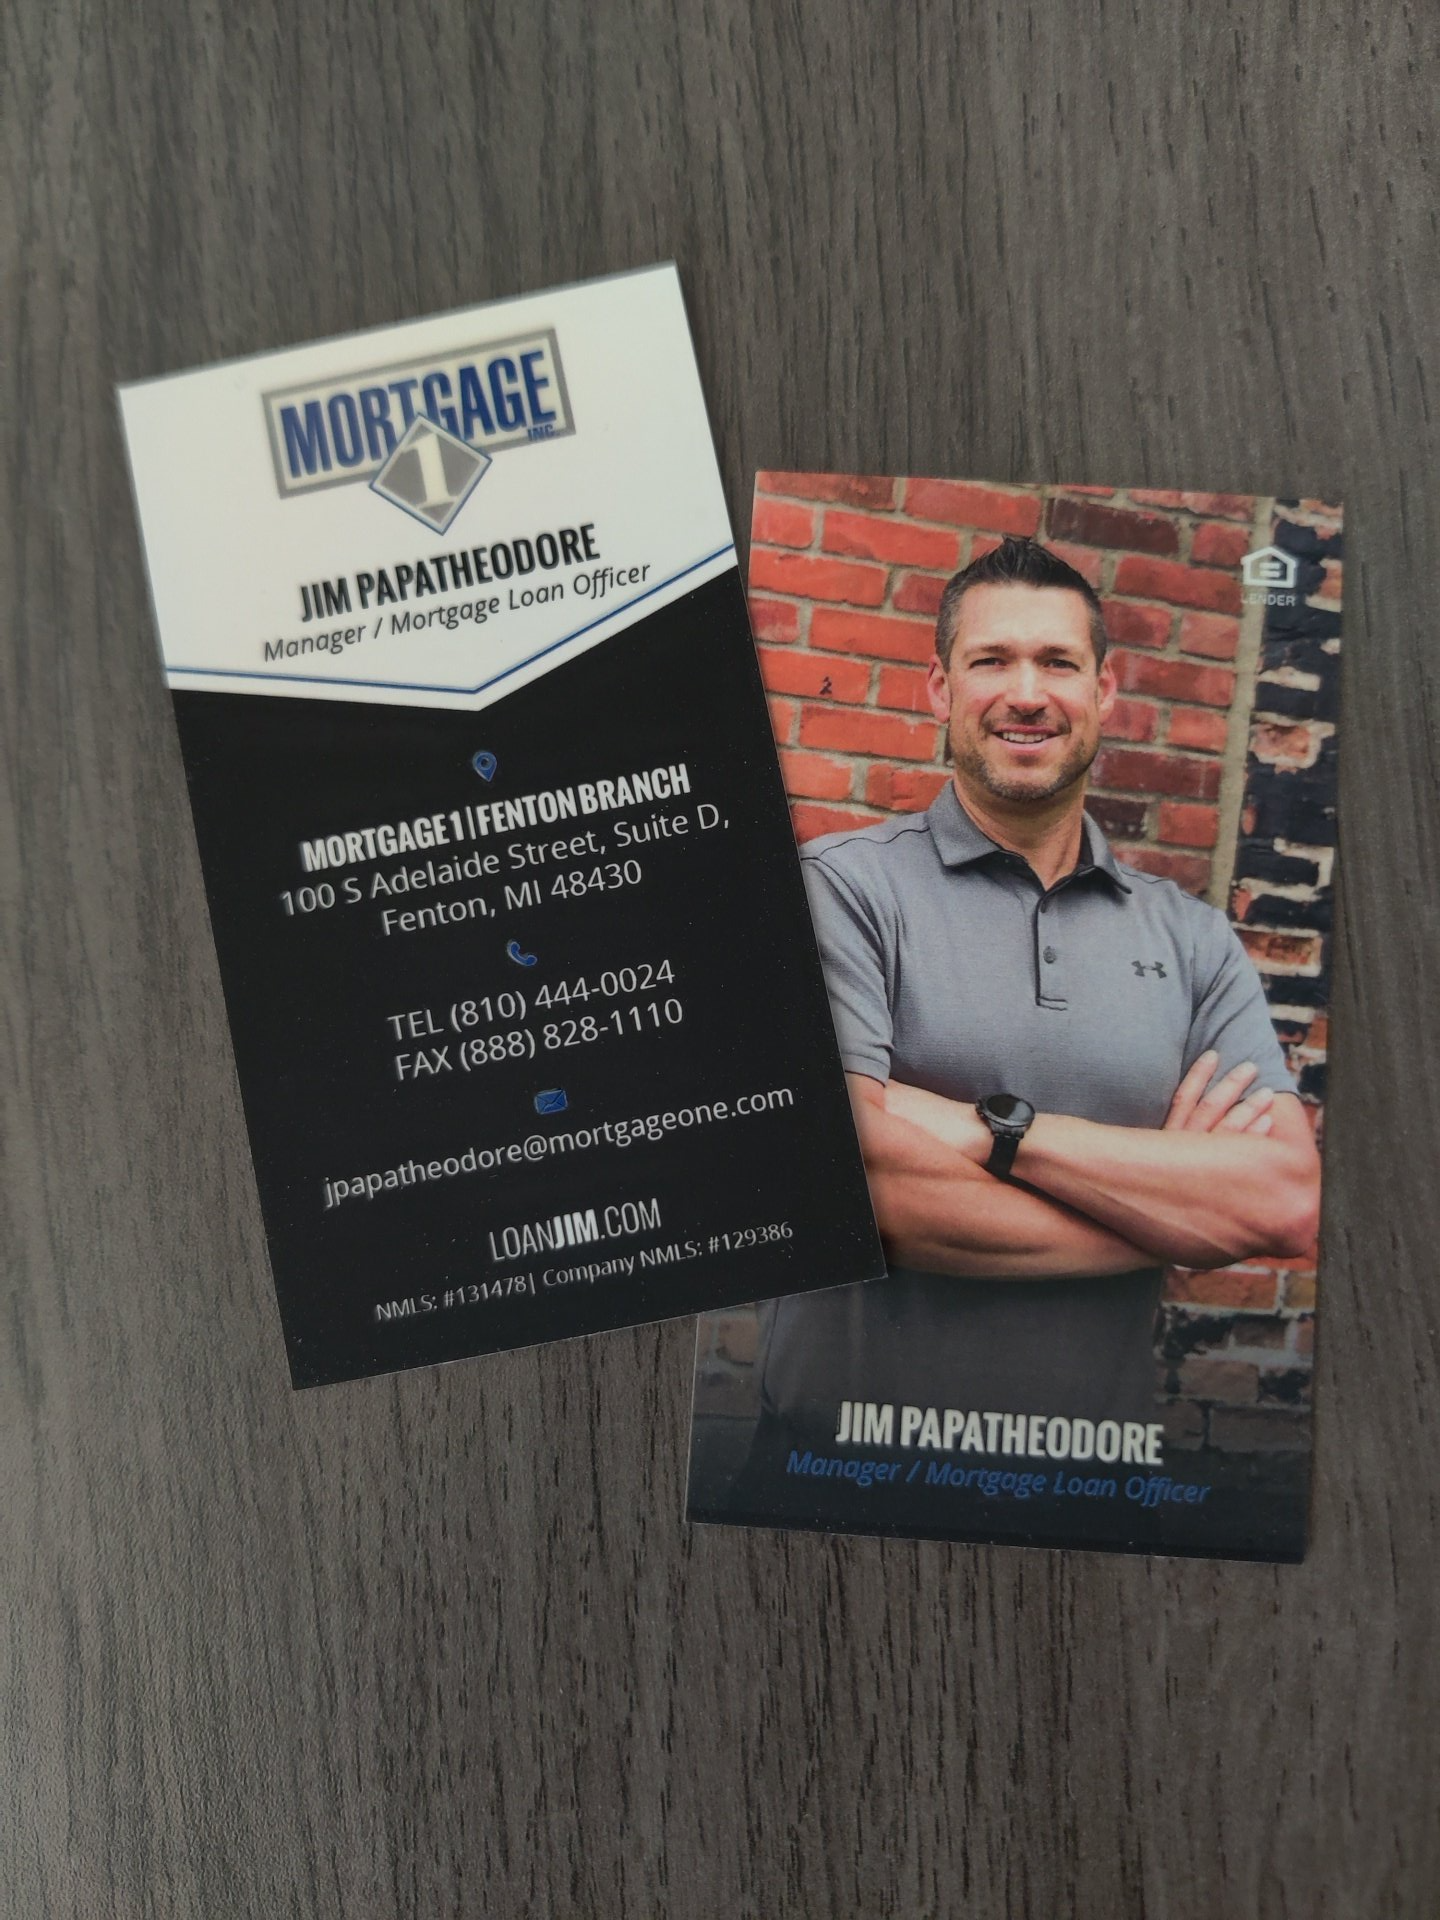 New Business Cards for Mortgage 1 - Fenton